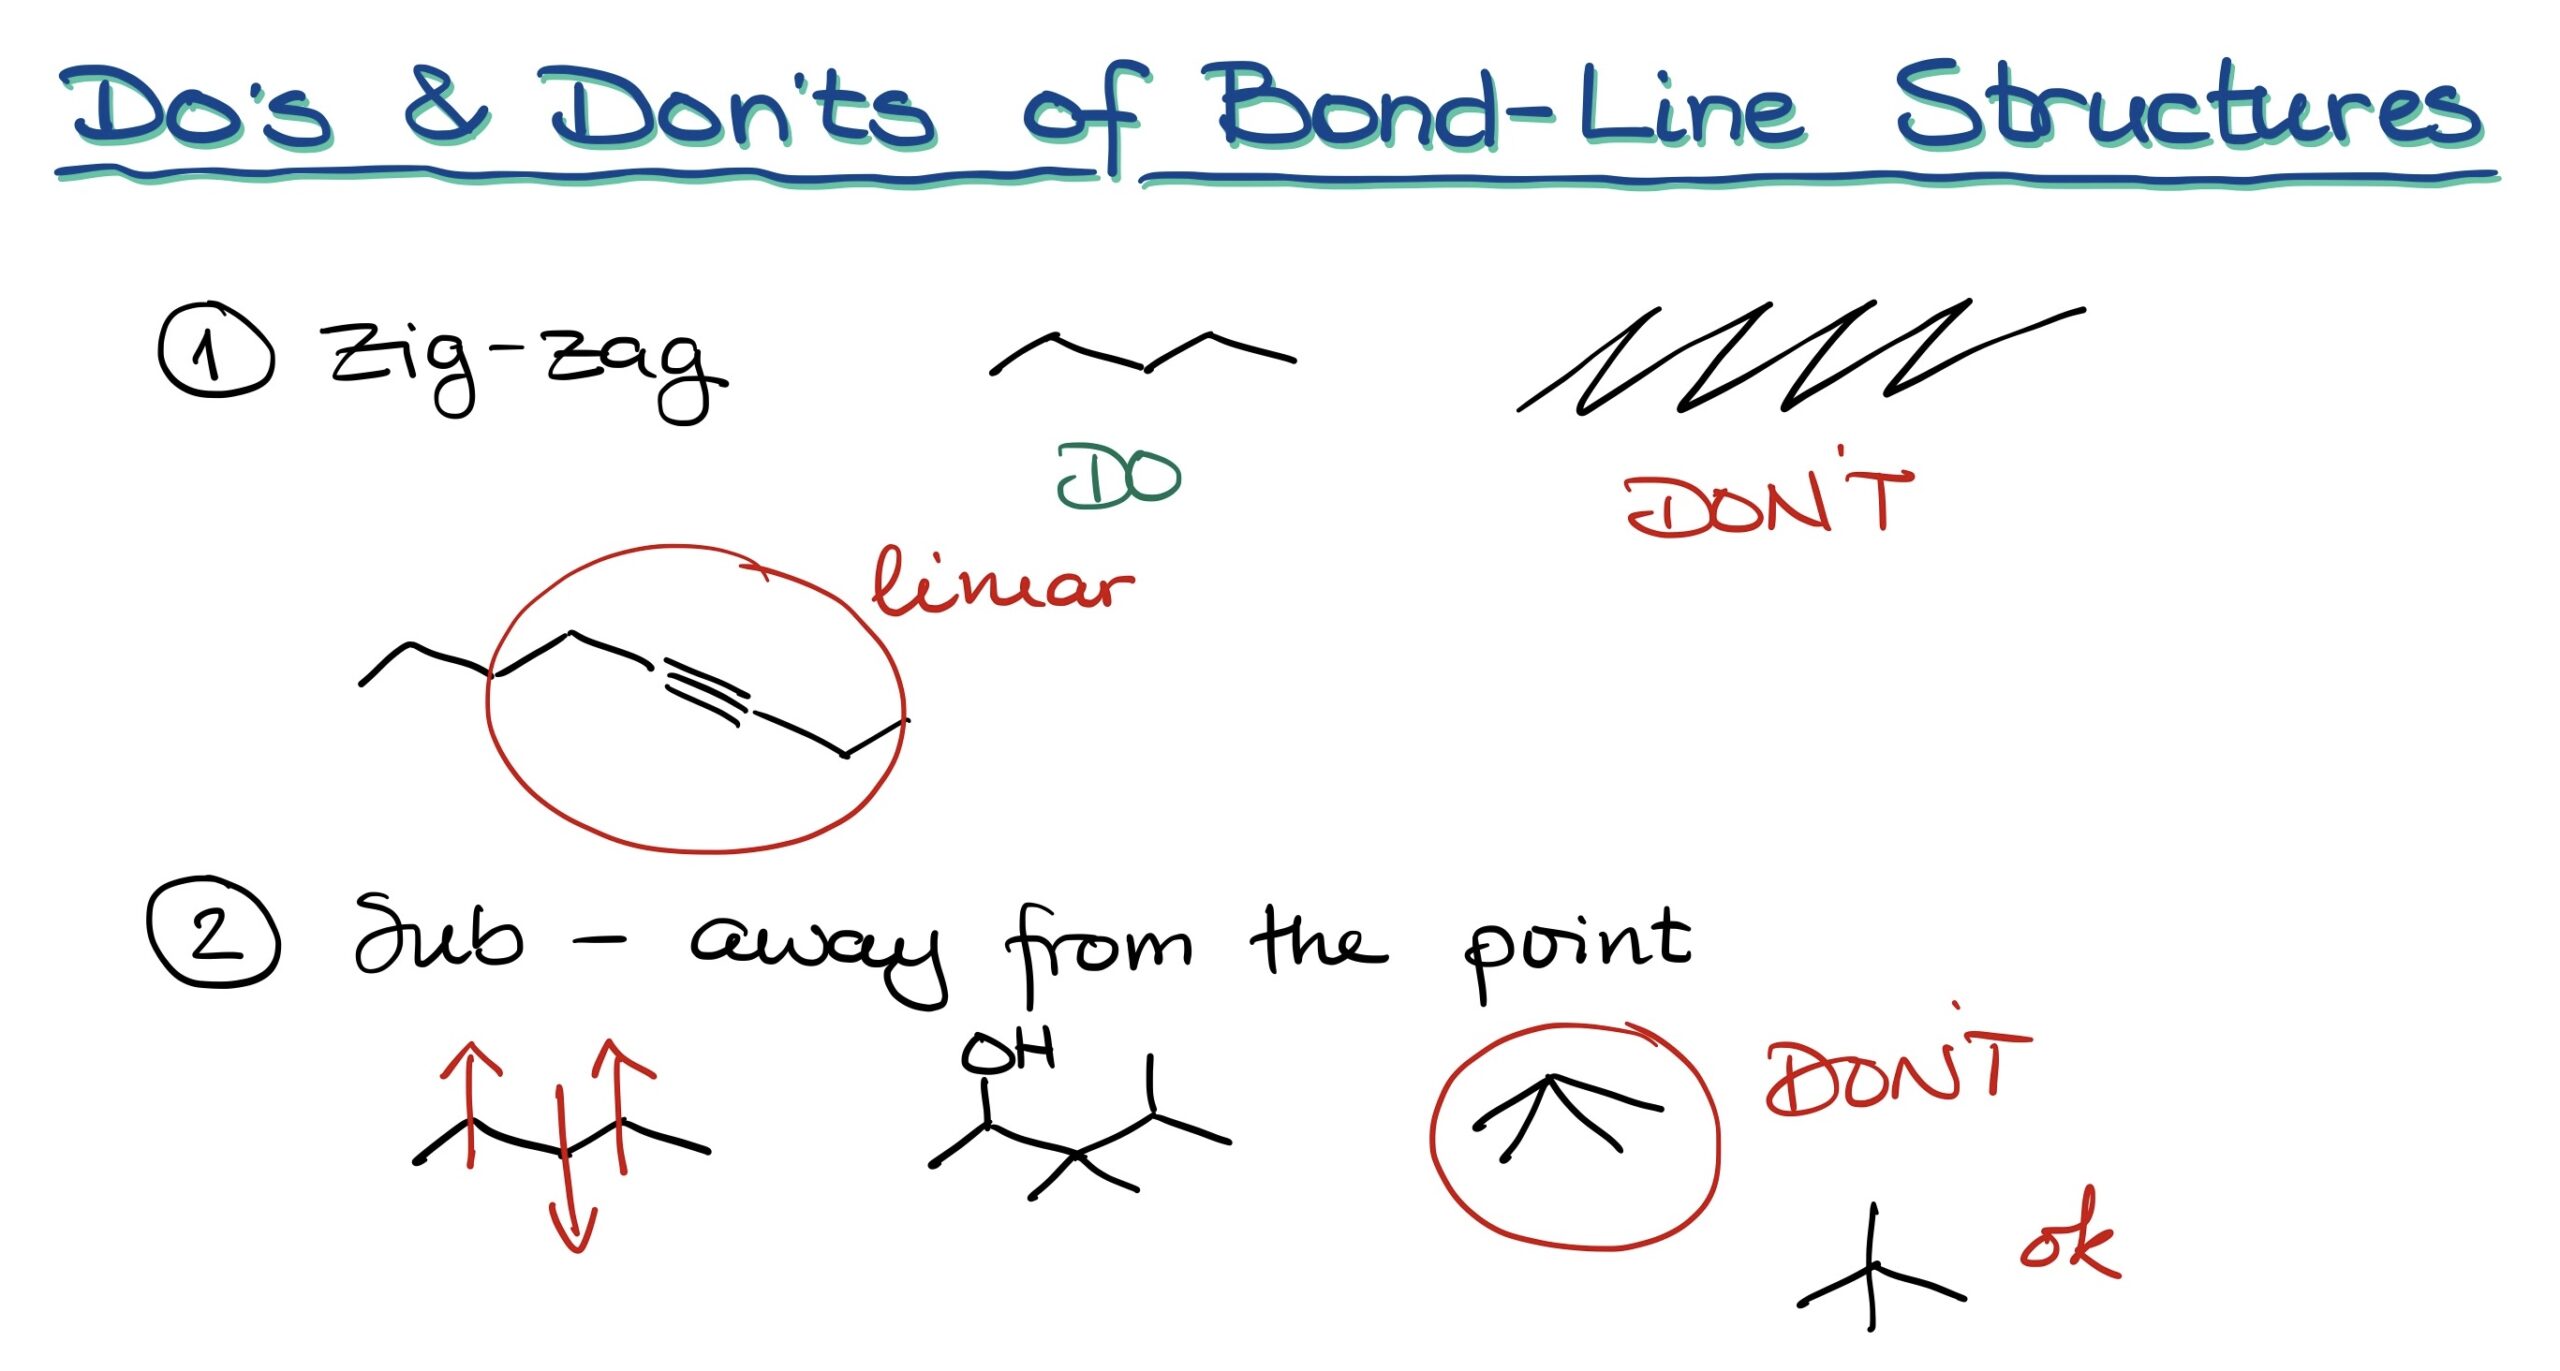 do's and don'ts of the bond-line structure drawing